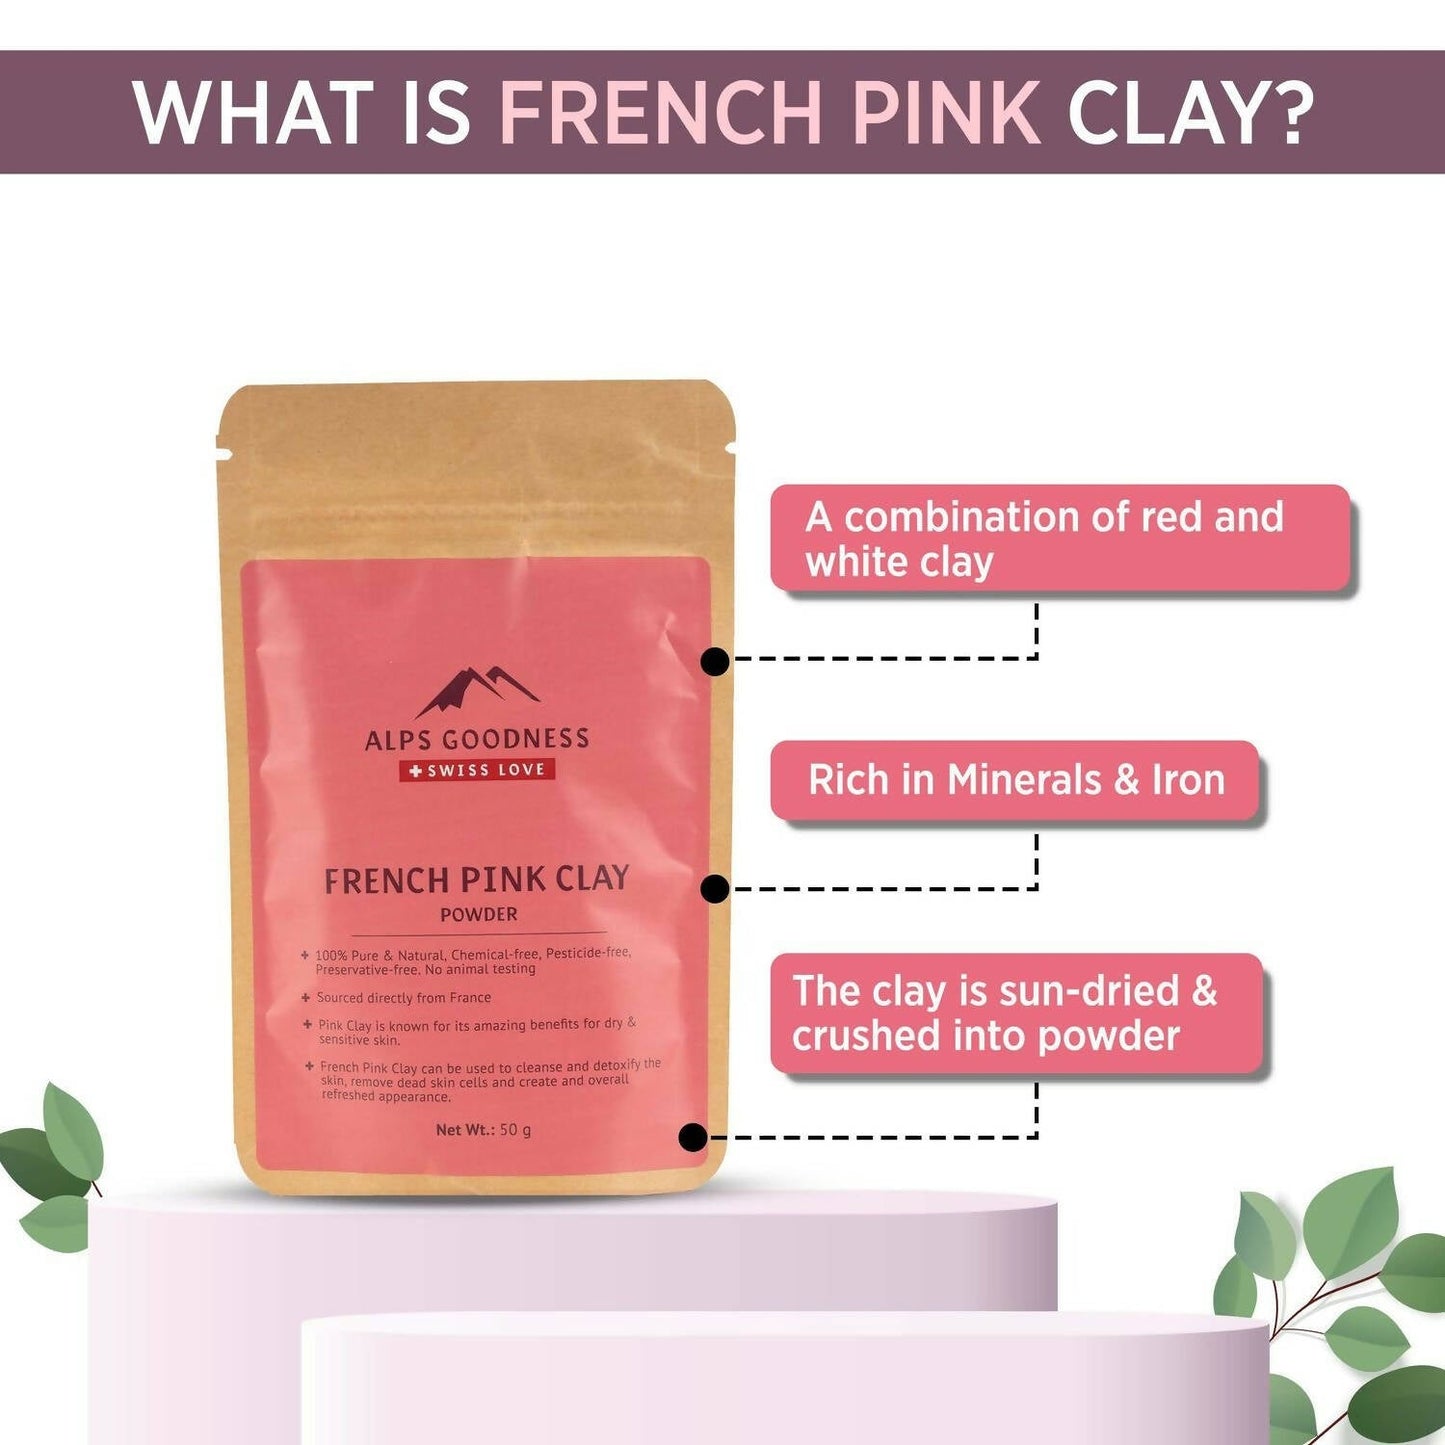 Alps Goodness French Pink Clay Powder